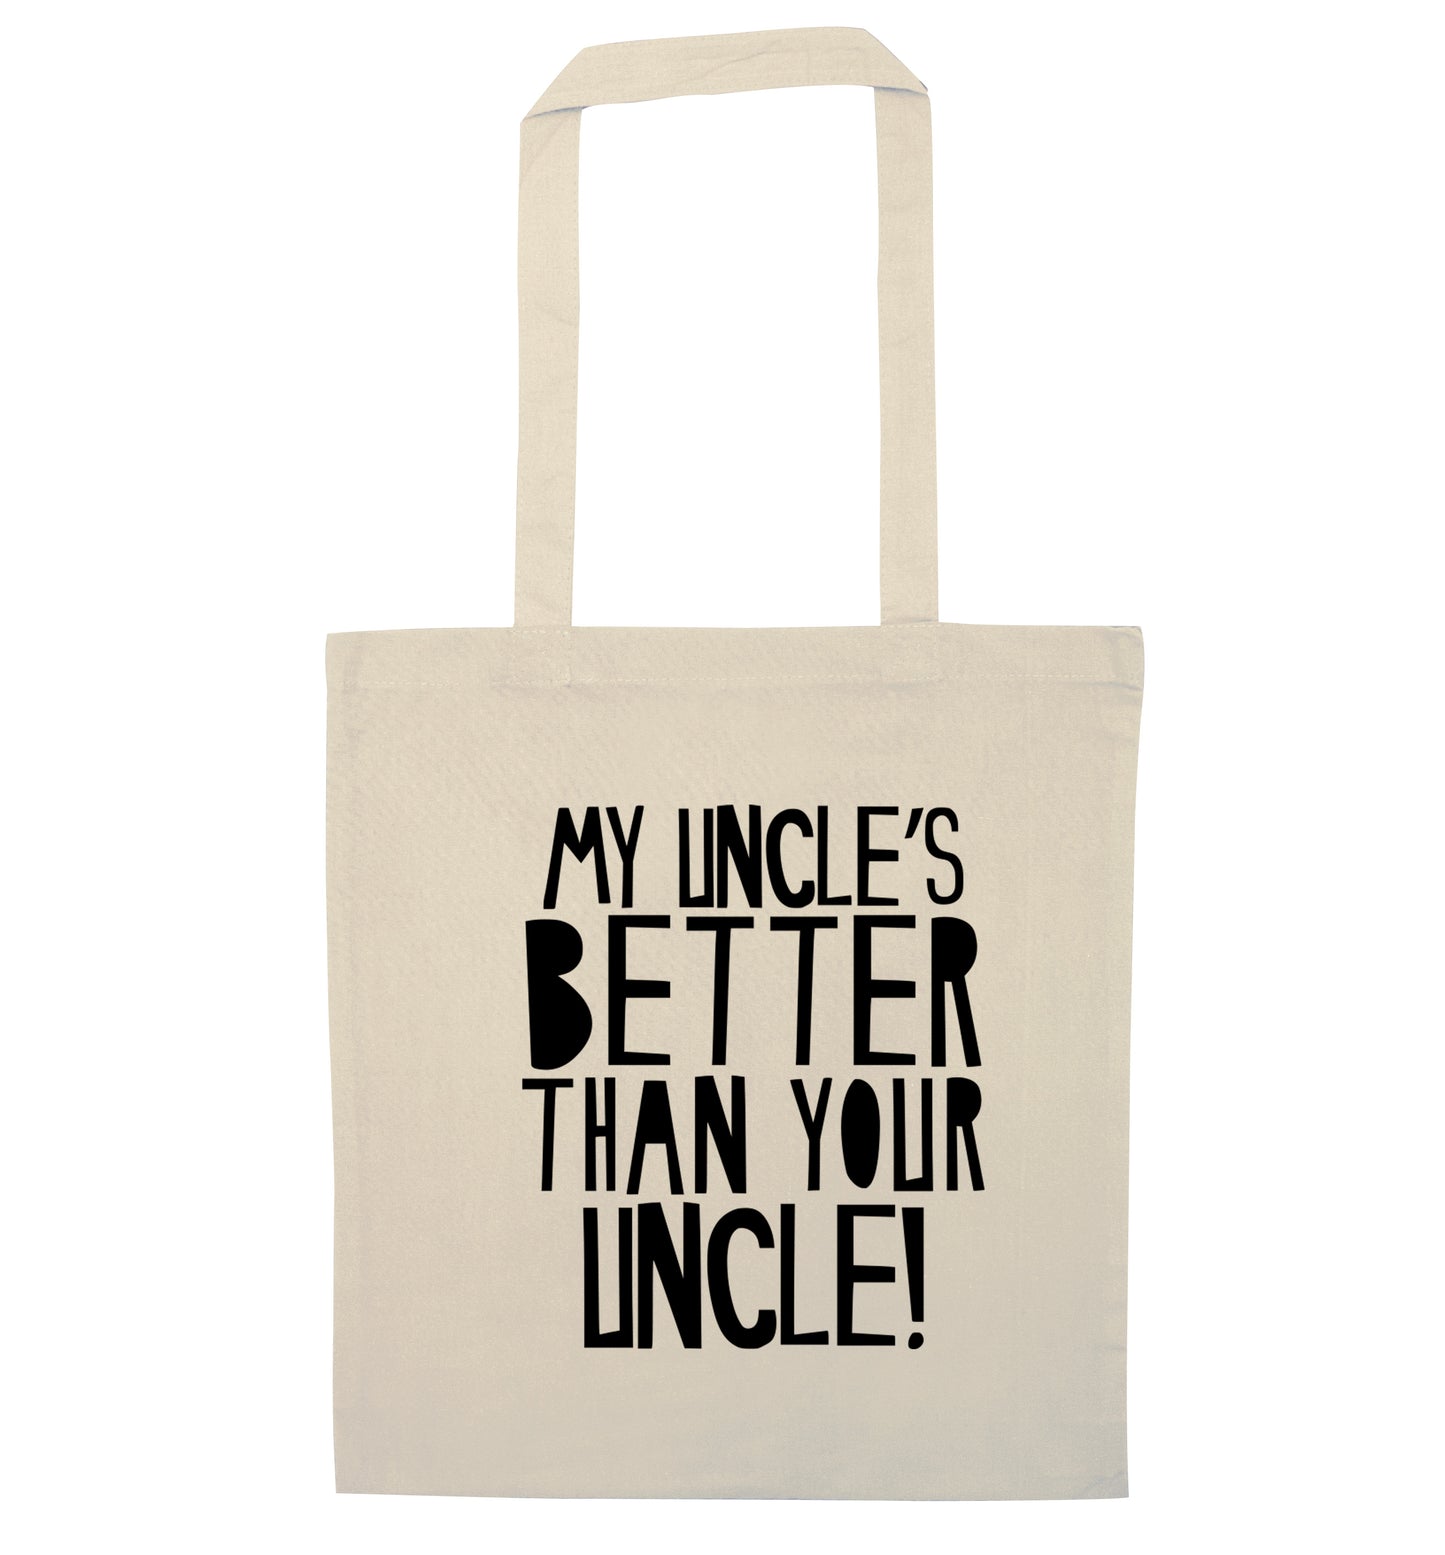 My uncles better than your uncle natural tote bag